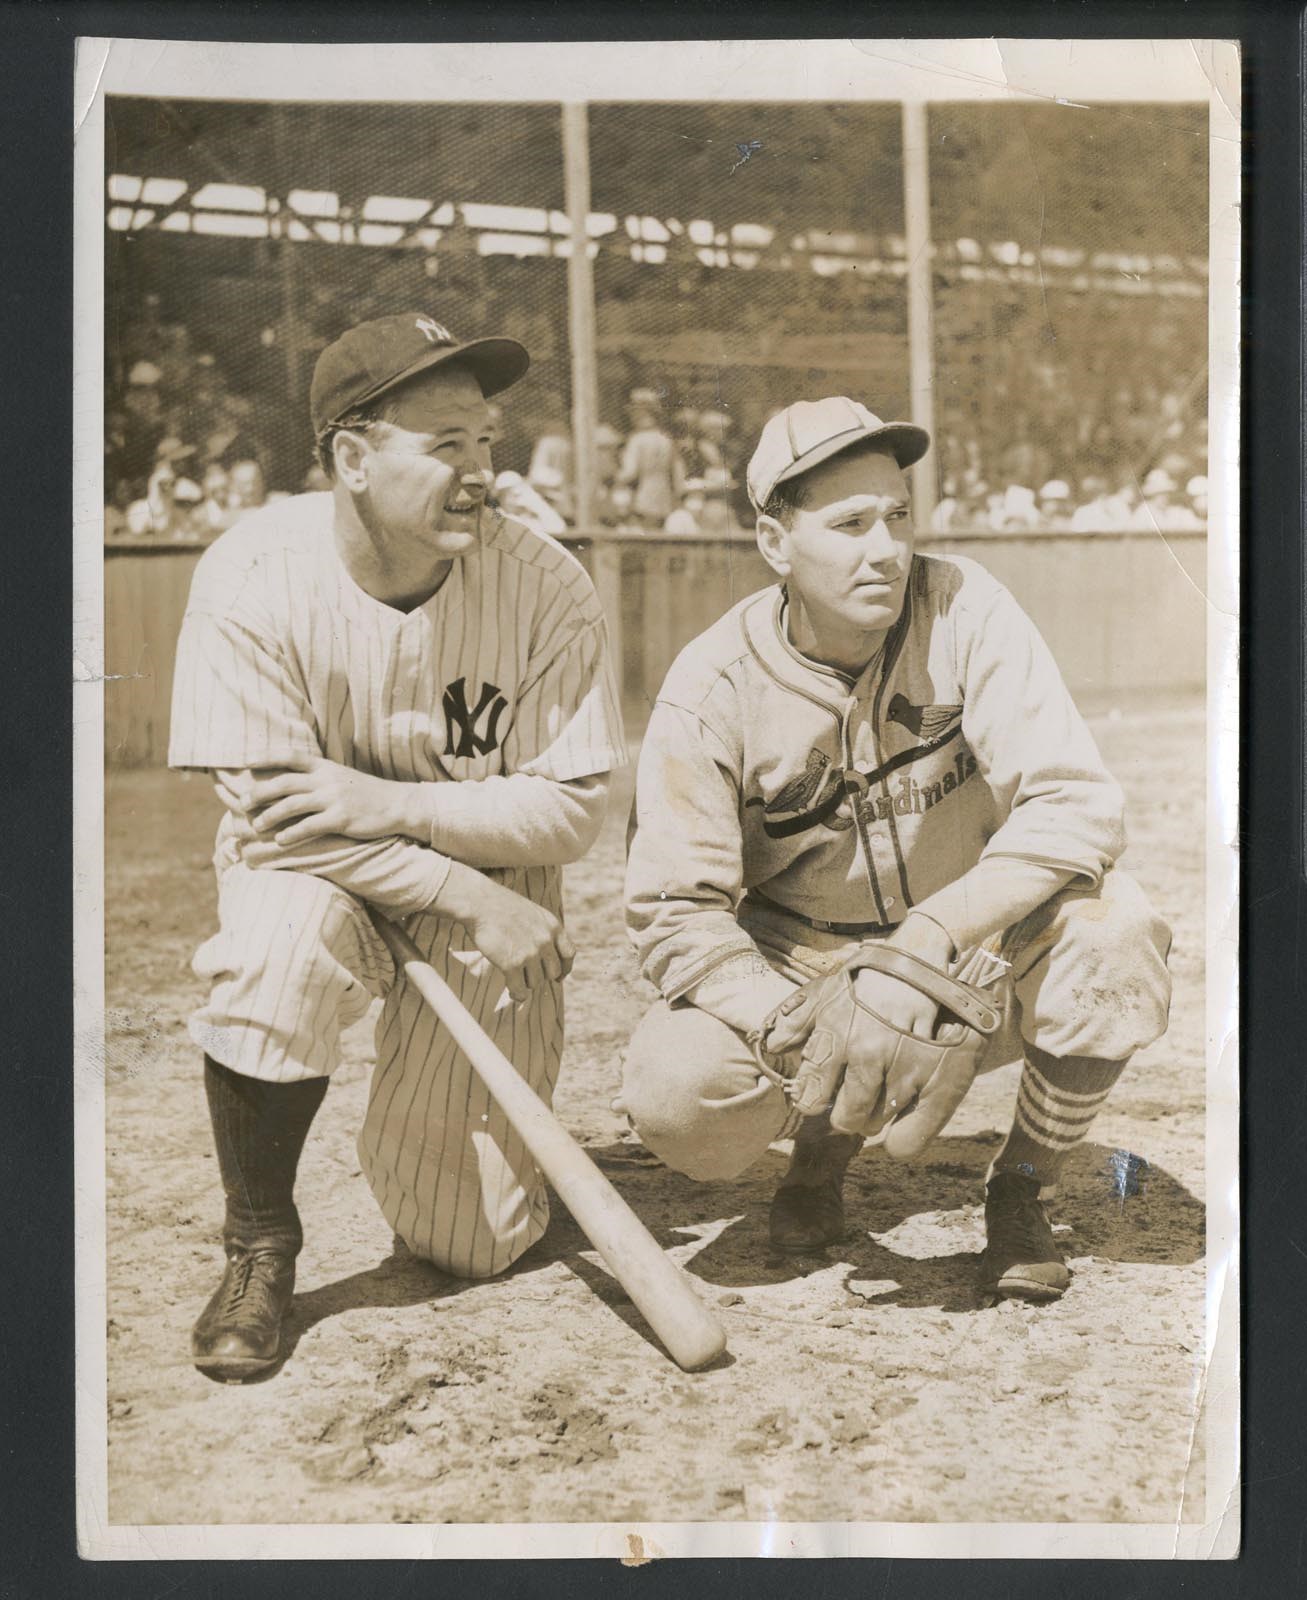 Vintage Sports Photographs - 1937 Lou Gehrig and Dizzy Dean "Holding Out" Photo Type 1